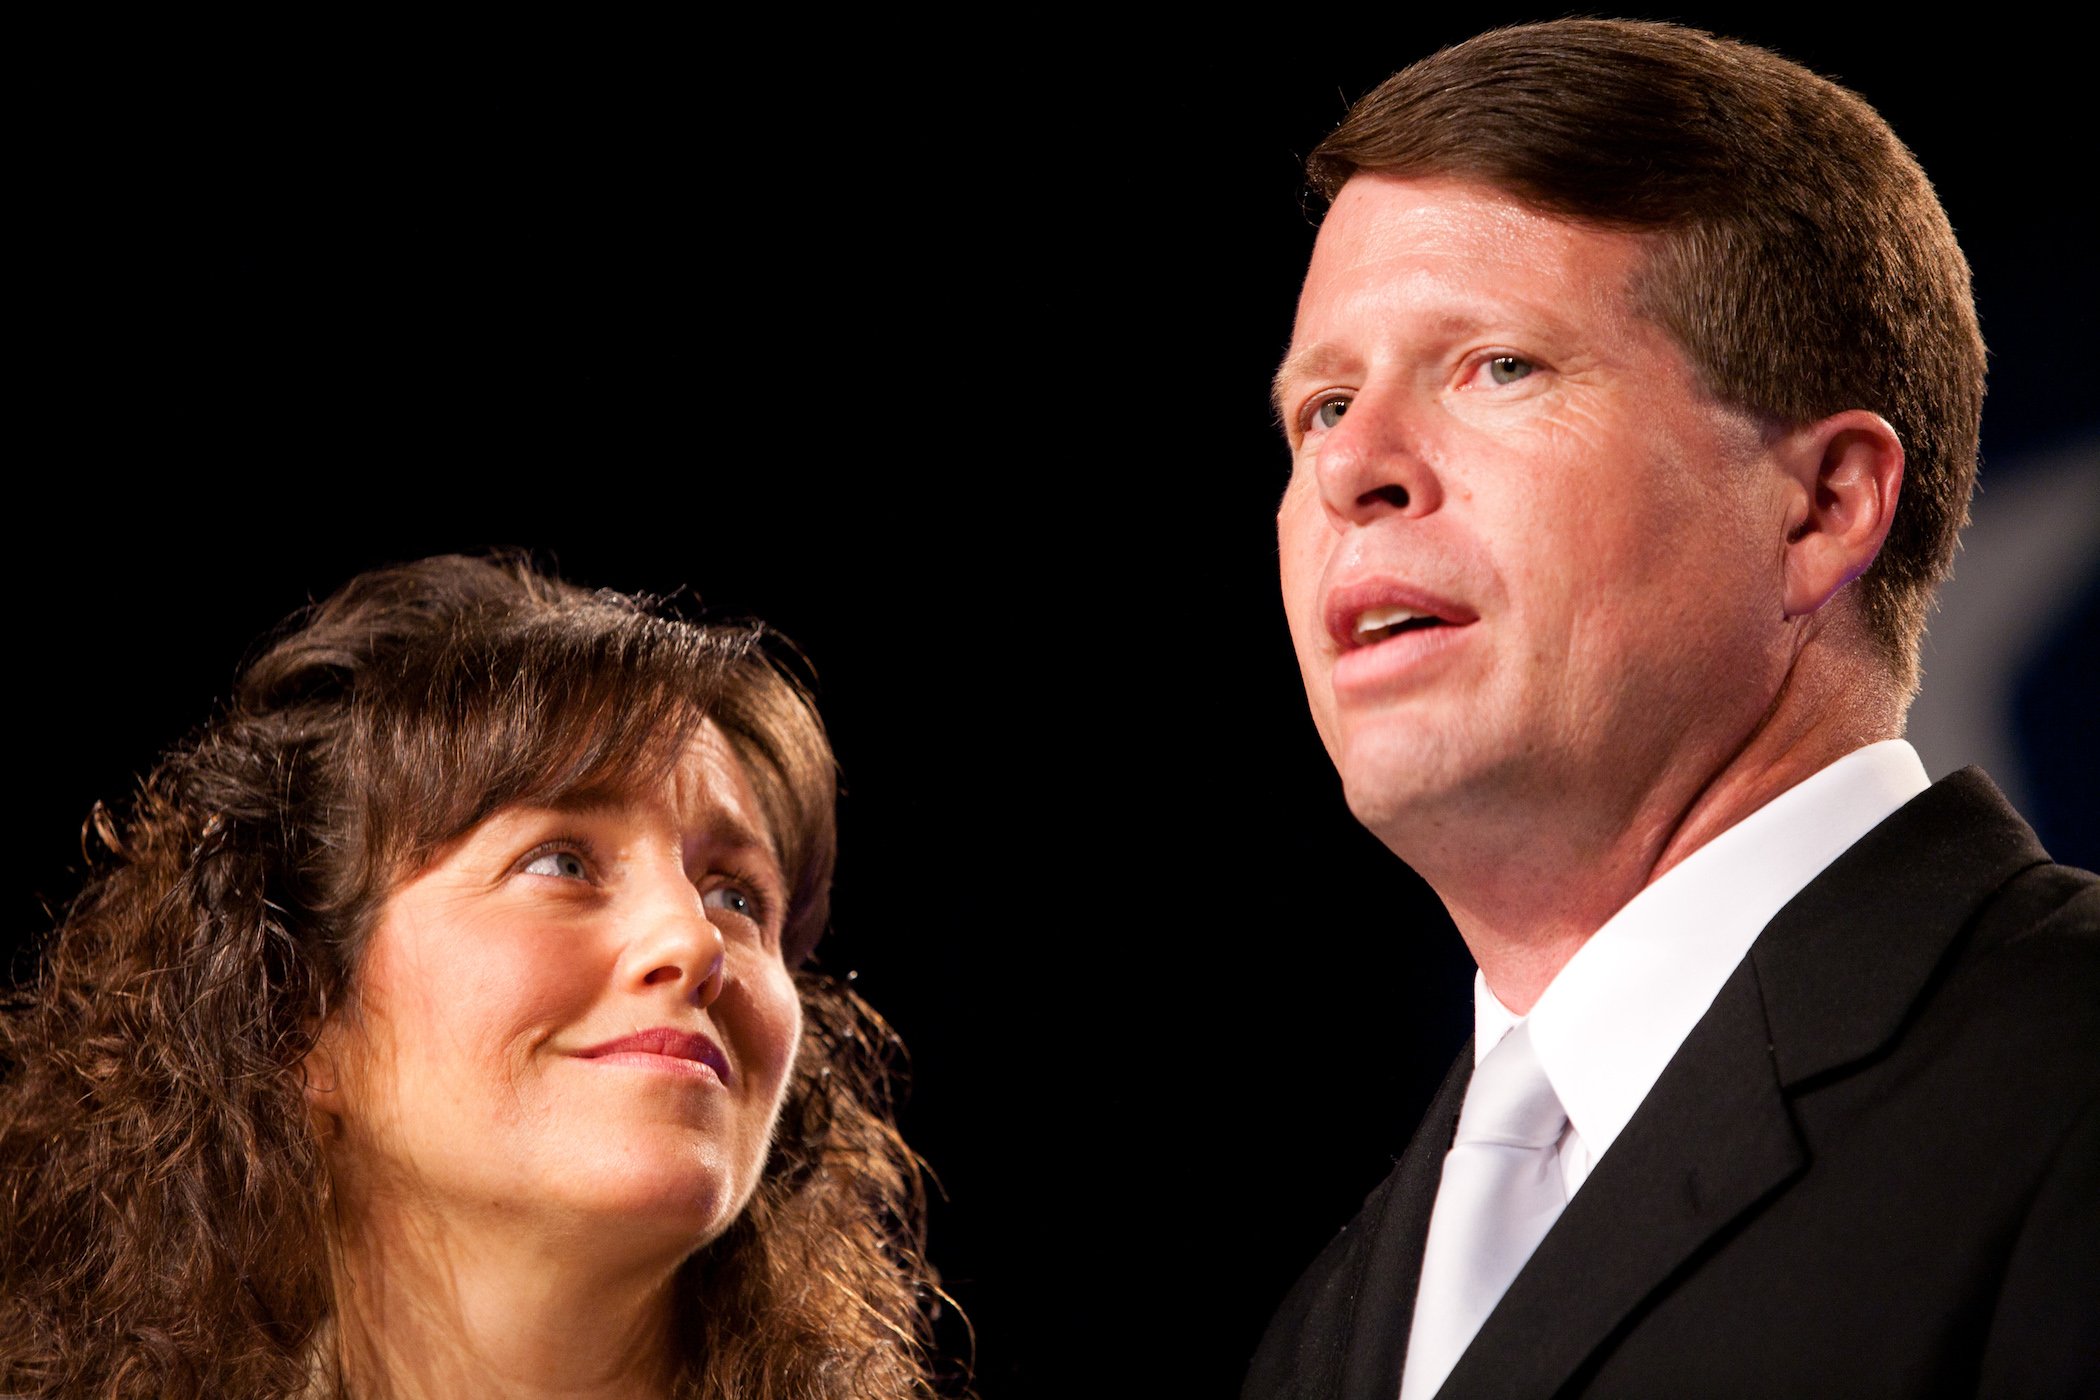 Michelle Duggar (L) and Jim Bob Duggar of the Duggar family from TLC's 'Counting On' against a black background.